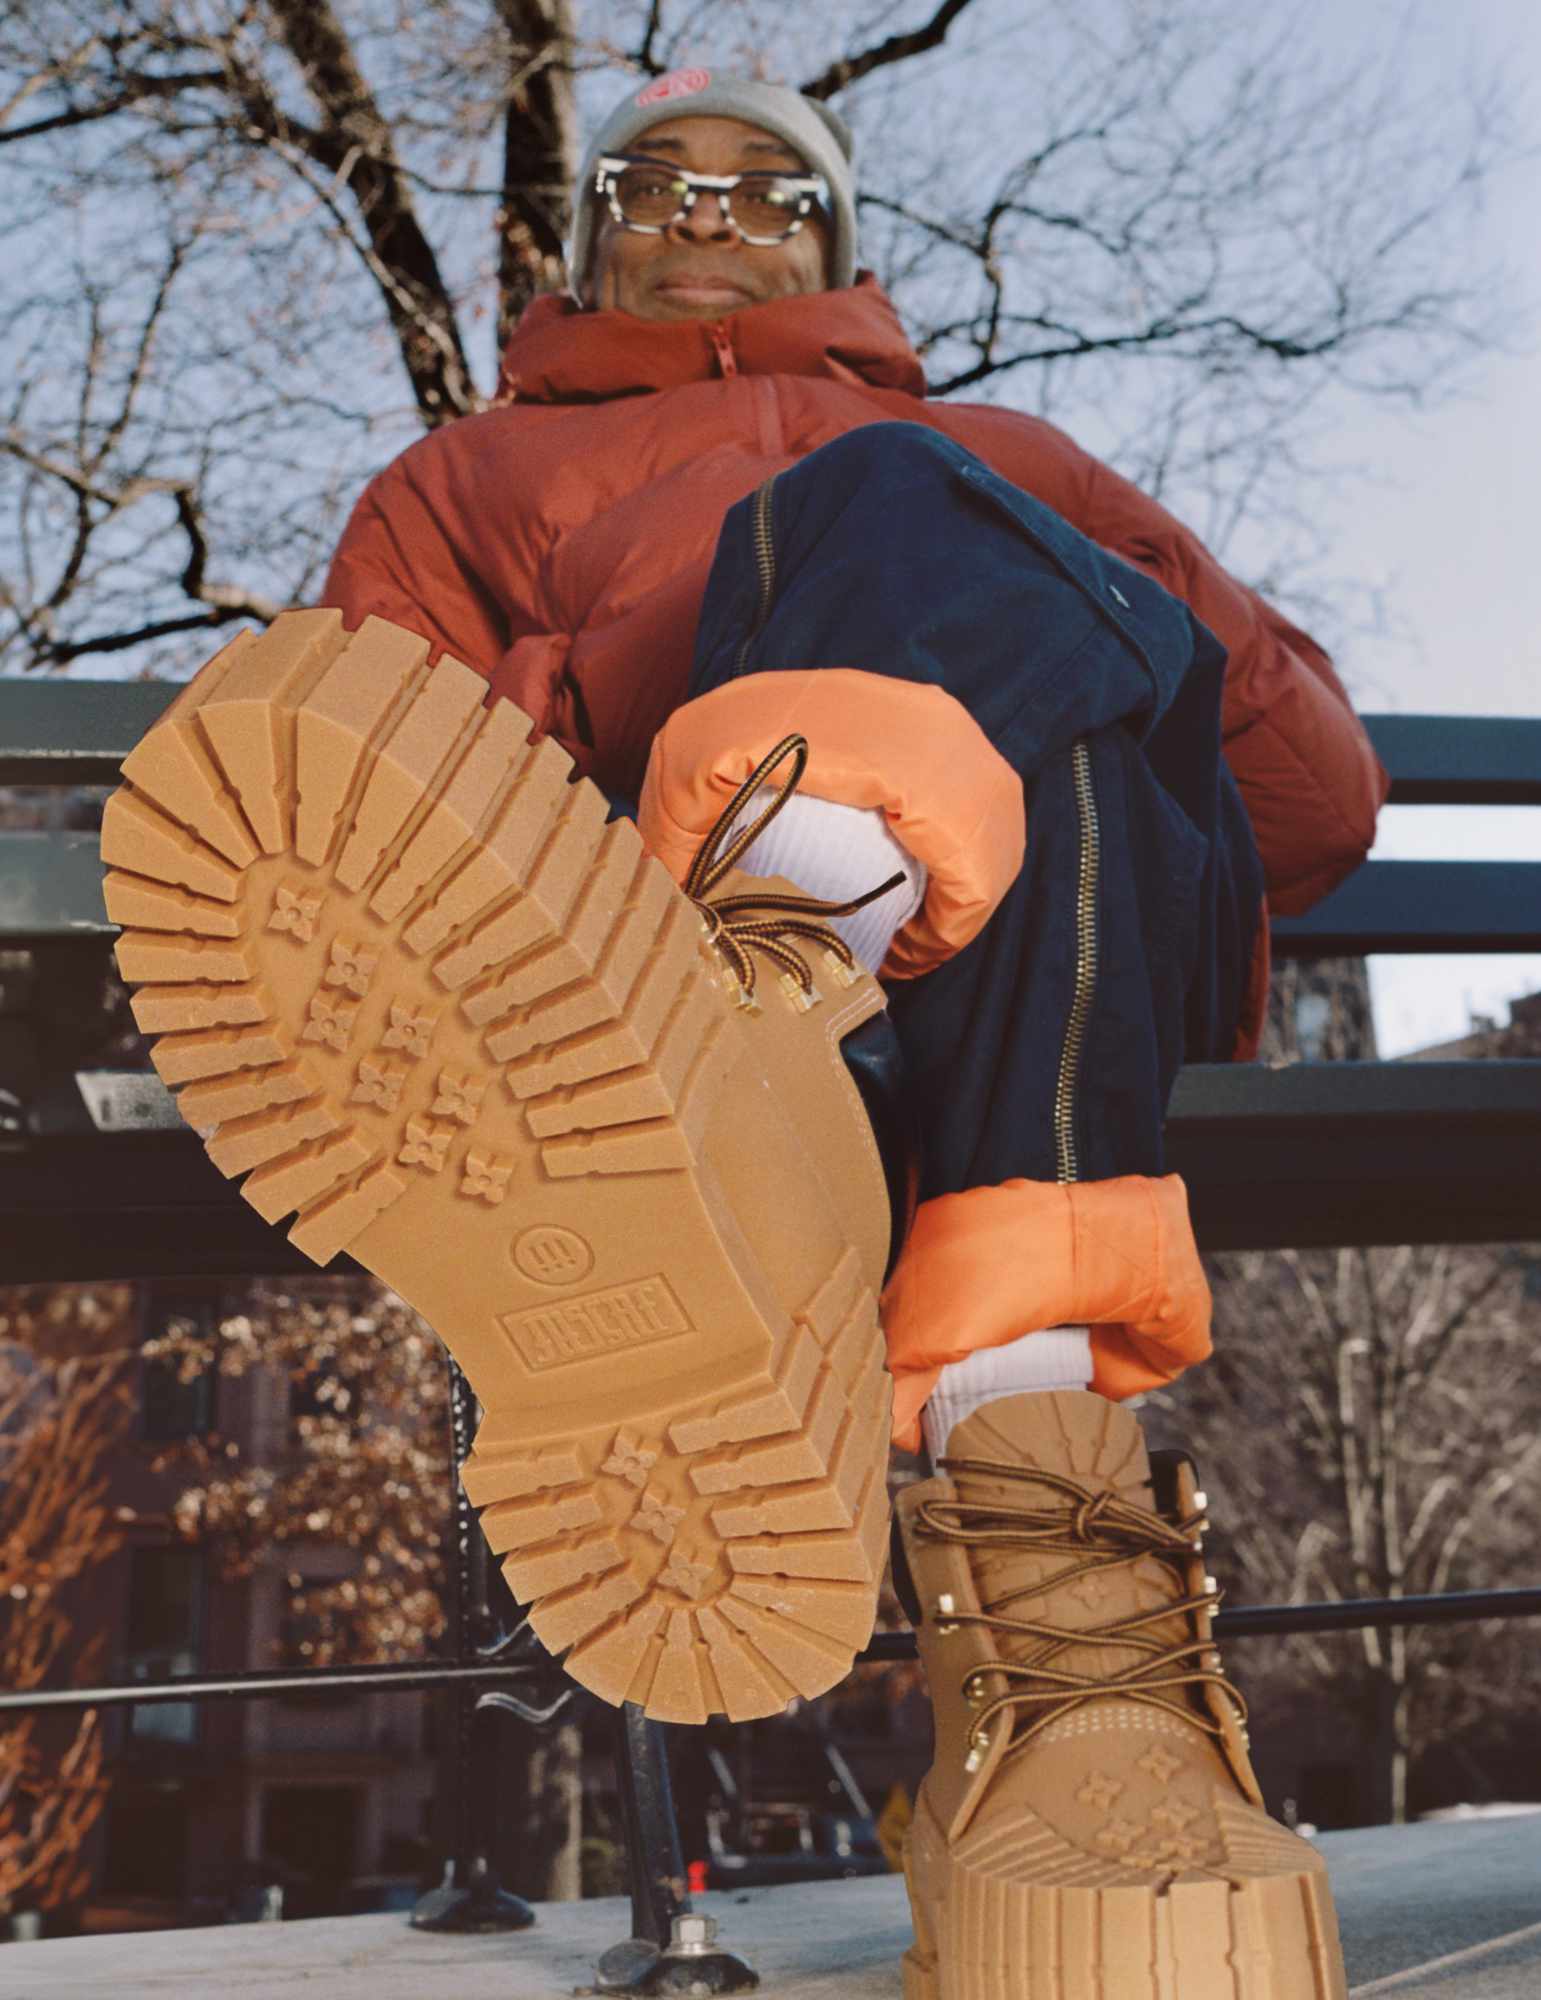 MSCHF's Wild "Timberland" Boots Are Timbs x2